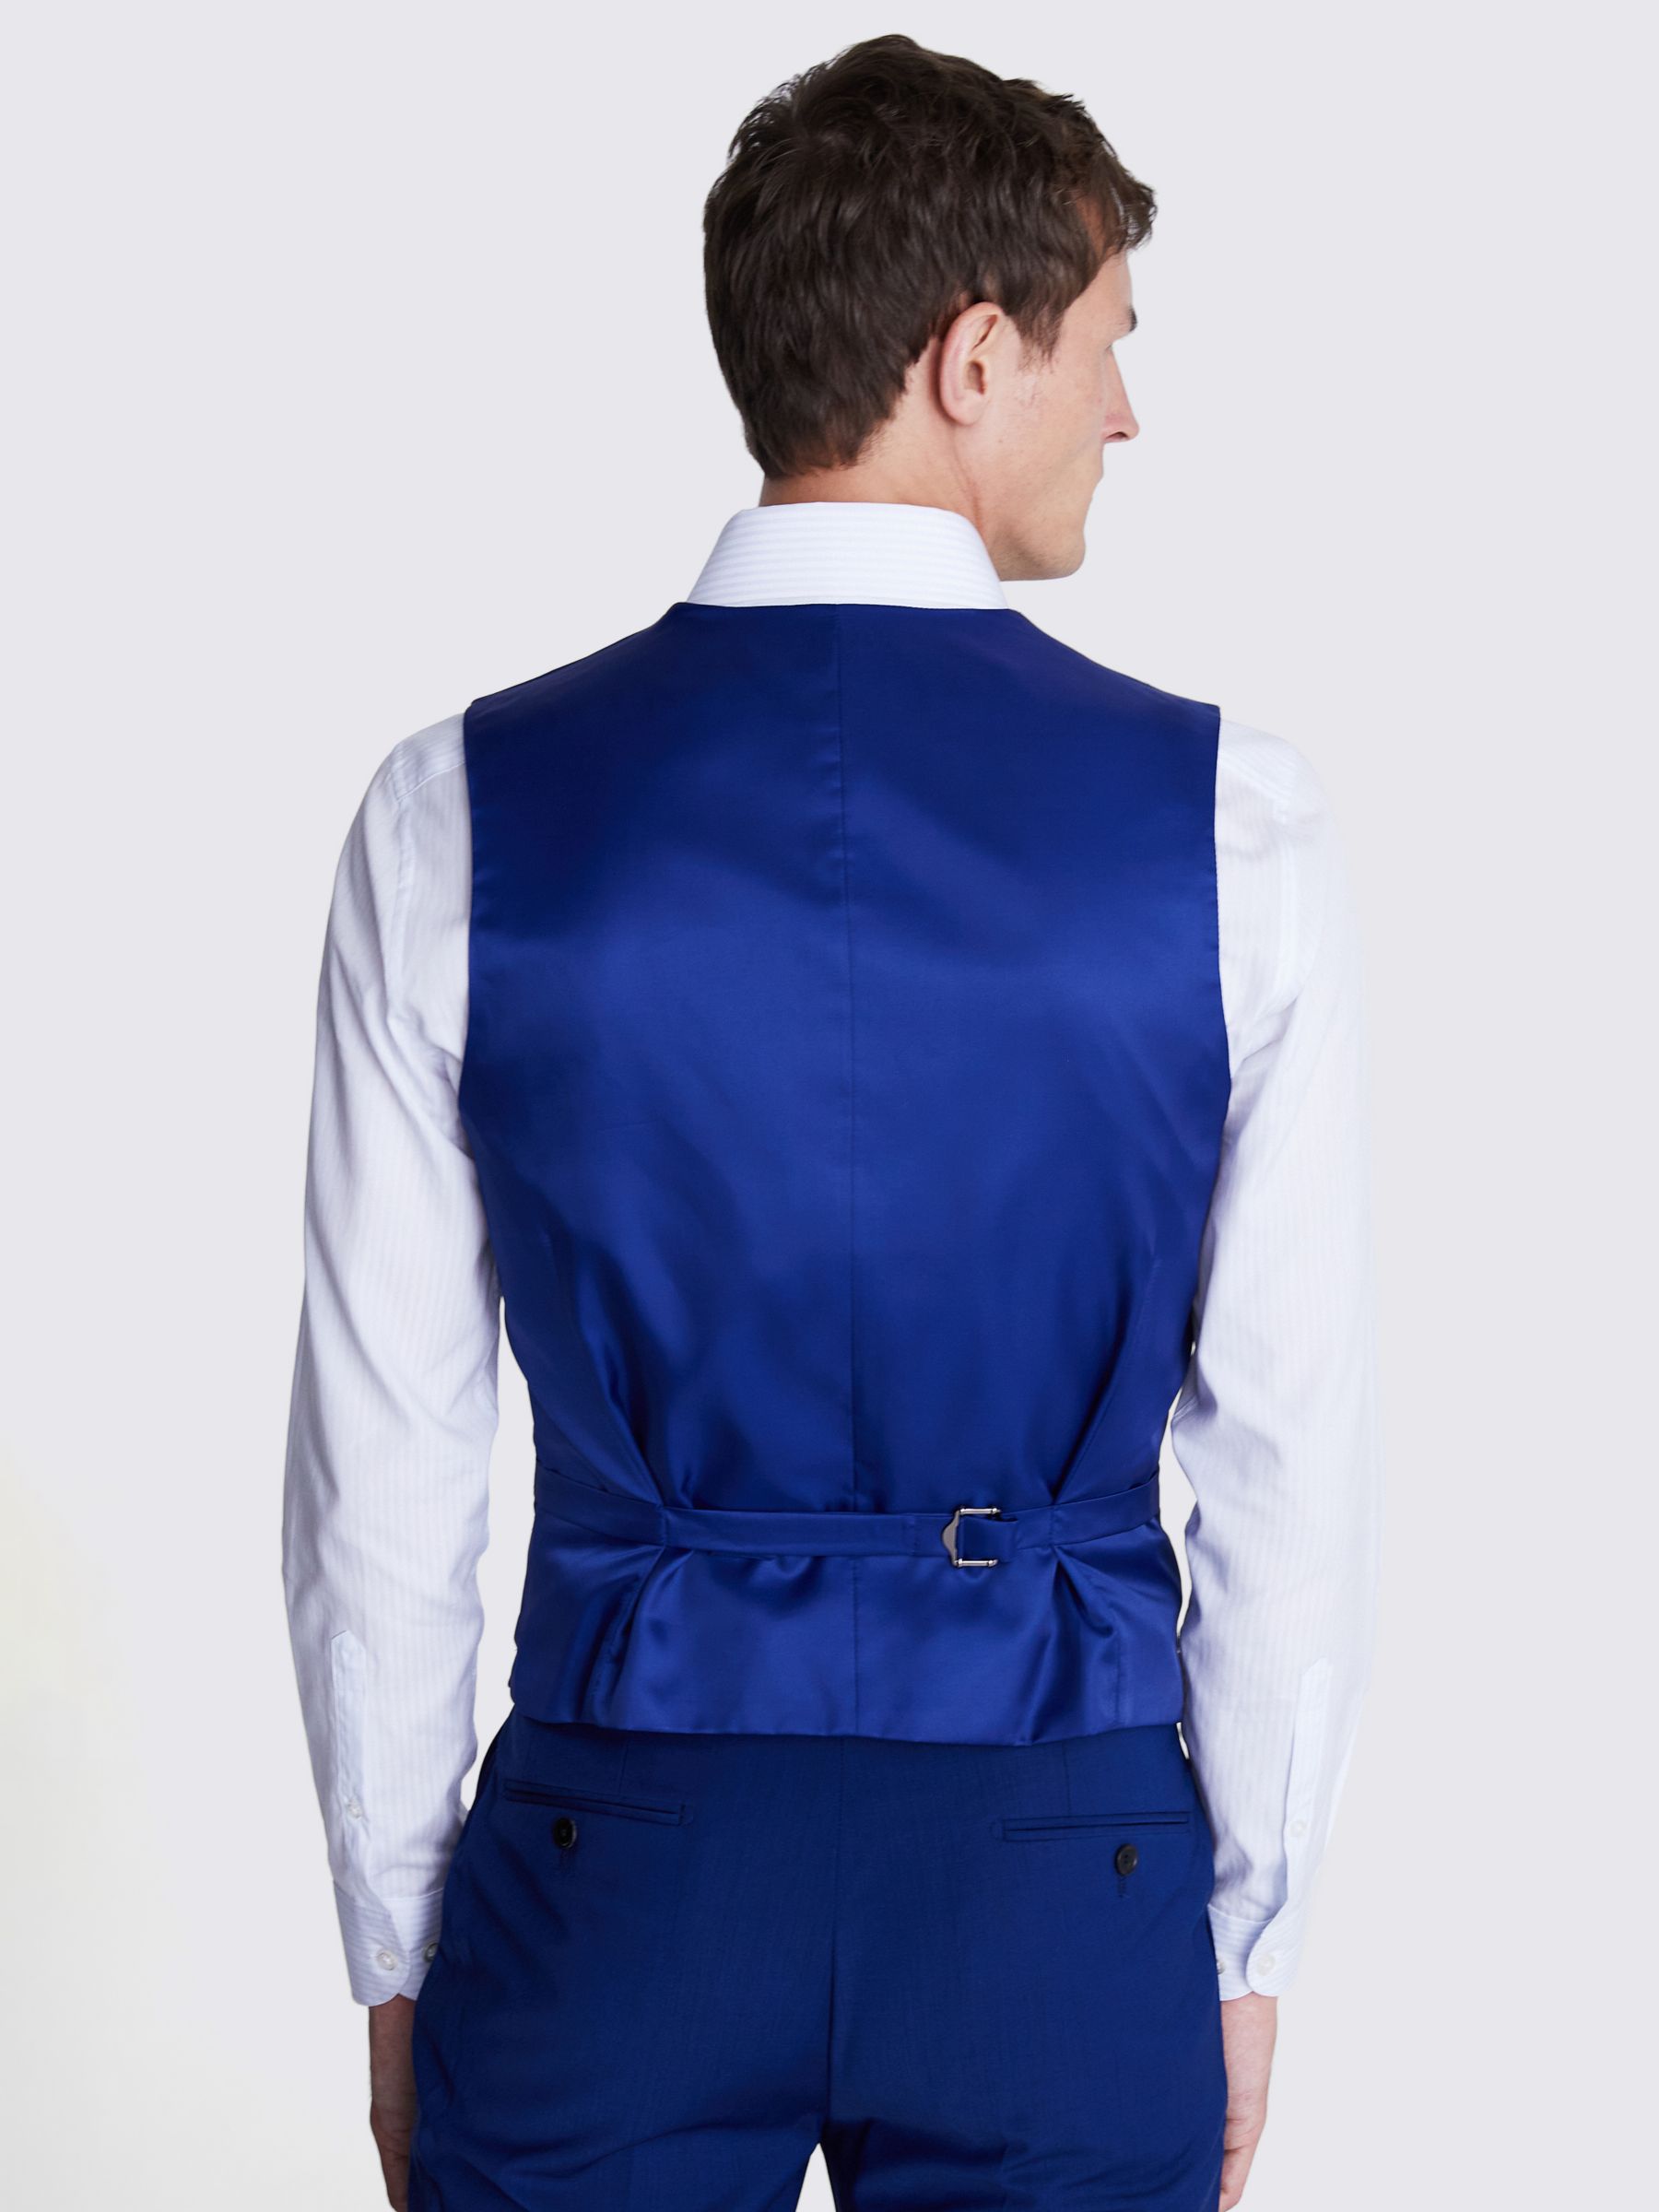 Moss Tailored Fit Wool Blend Waistcoat, Royal Blue, 38S